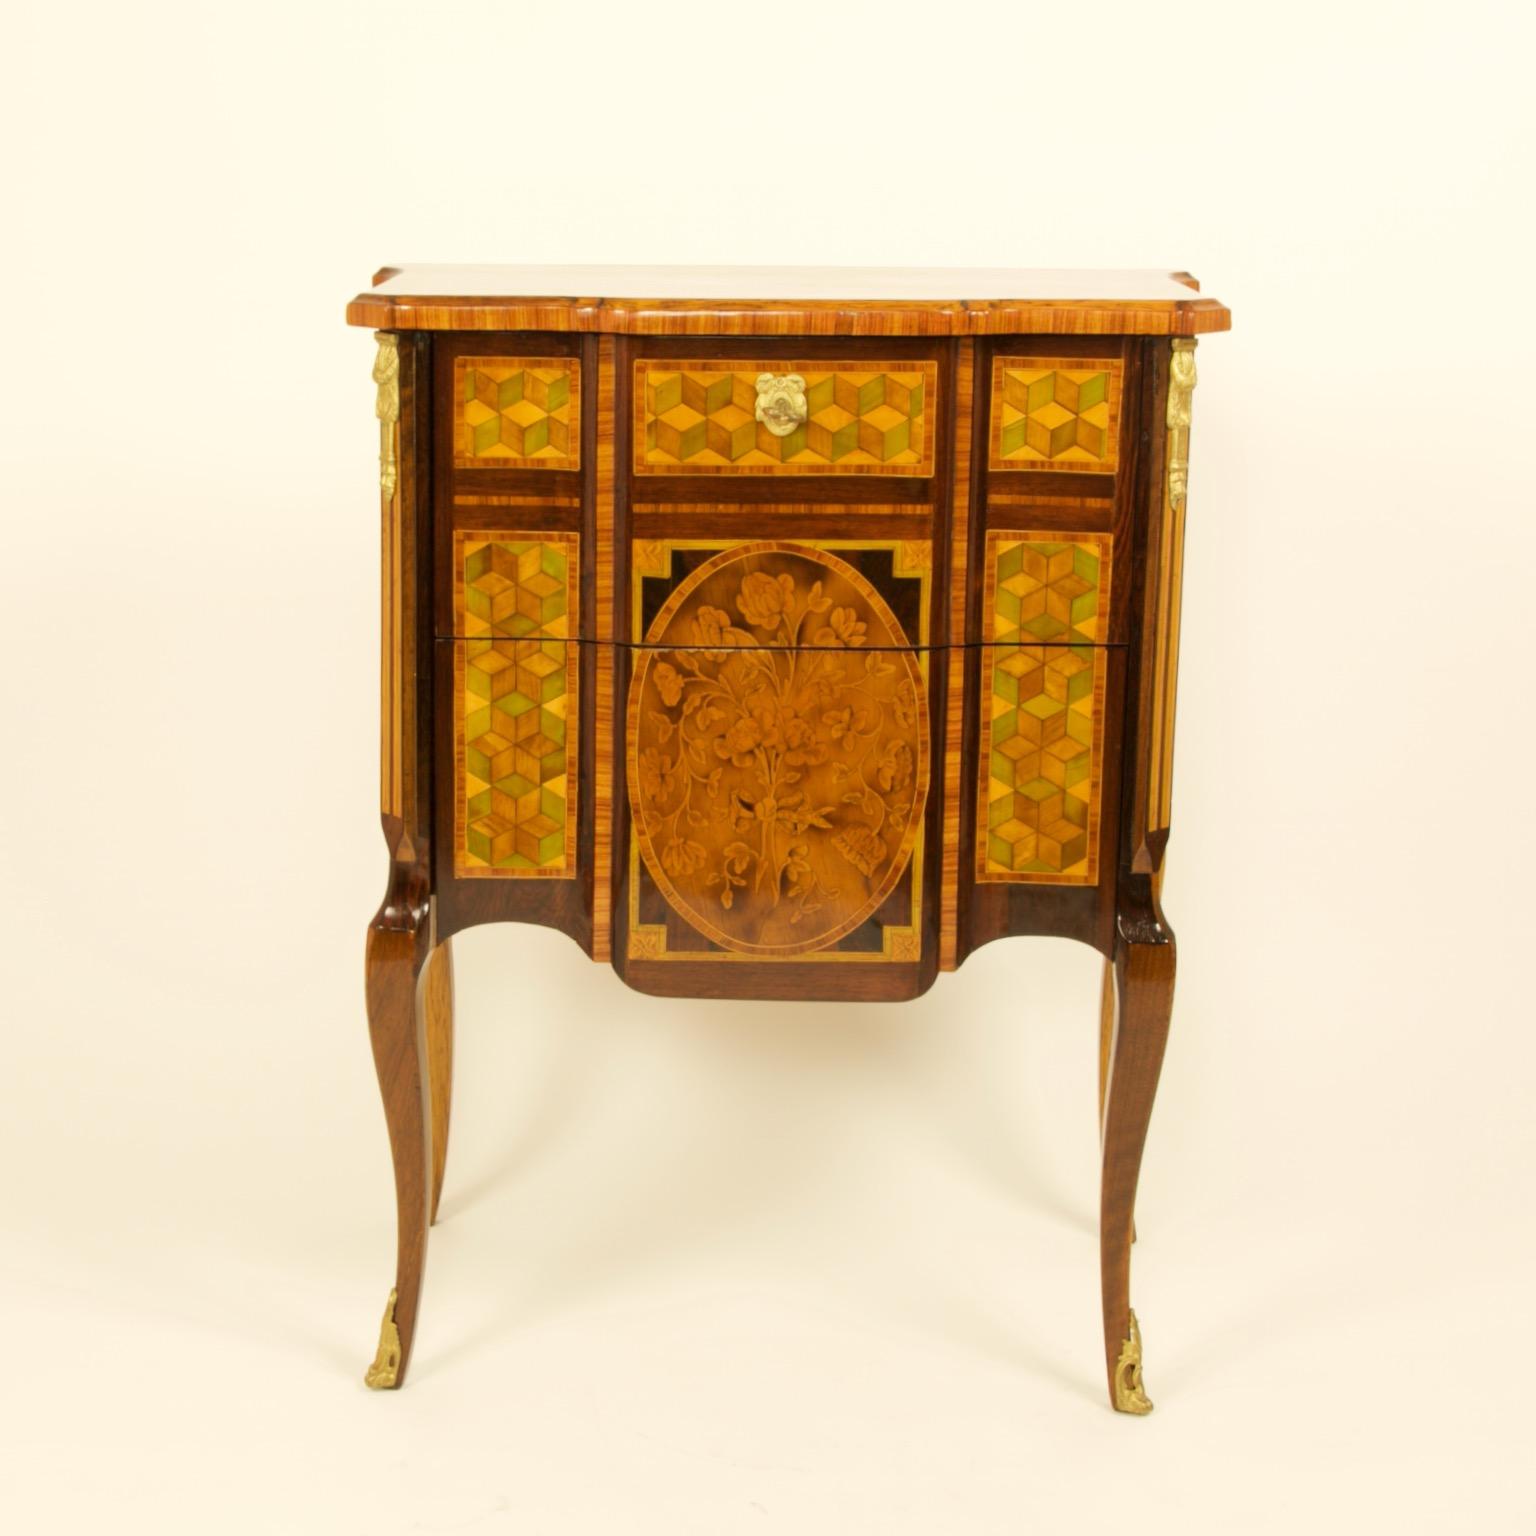 French 18th century Louis XV transition marquetry commode entre deux or sauteuse in the manner of Louis Noel Malle (1734-1782)

Excellent and rare small commode, so-called 